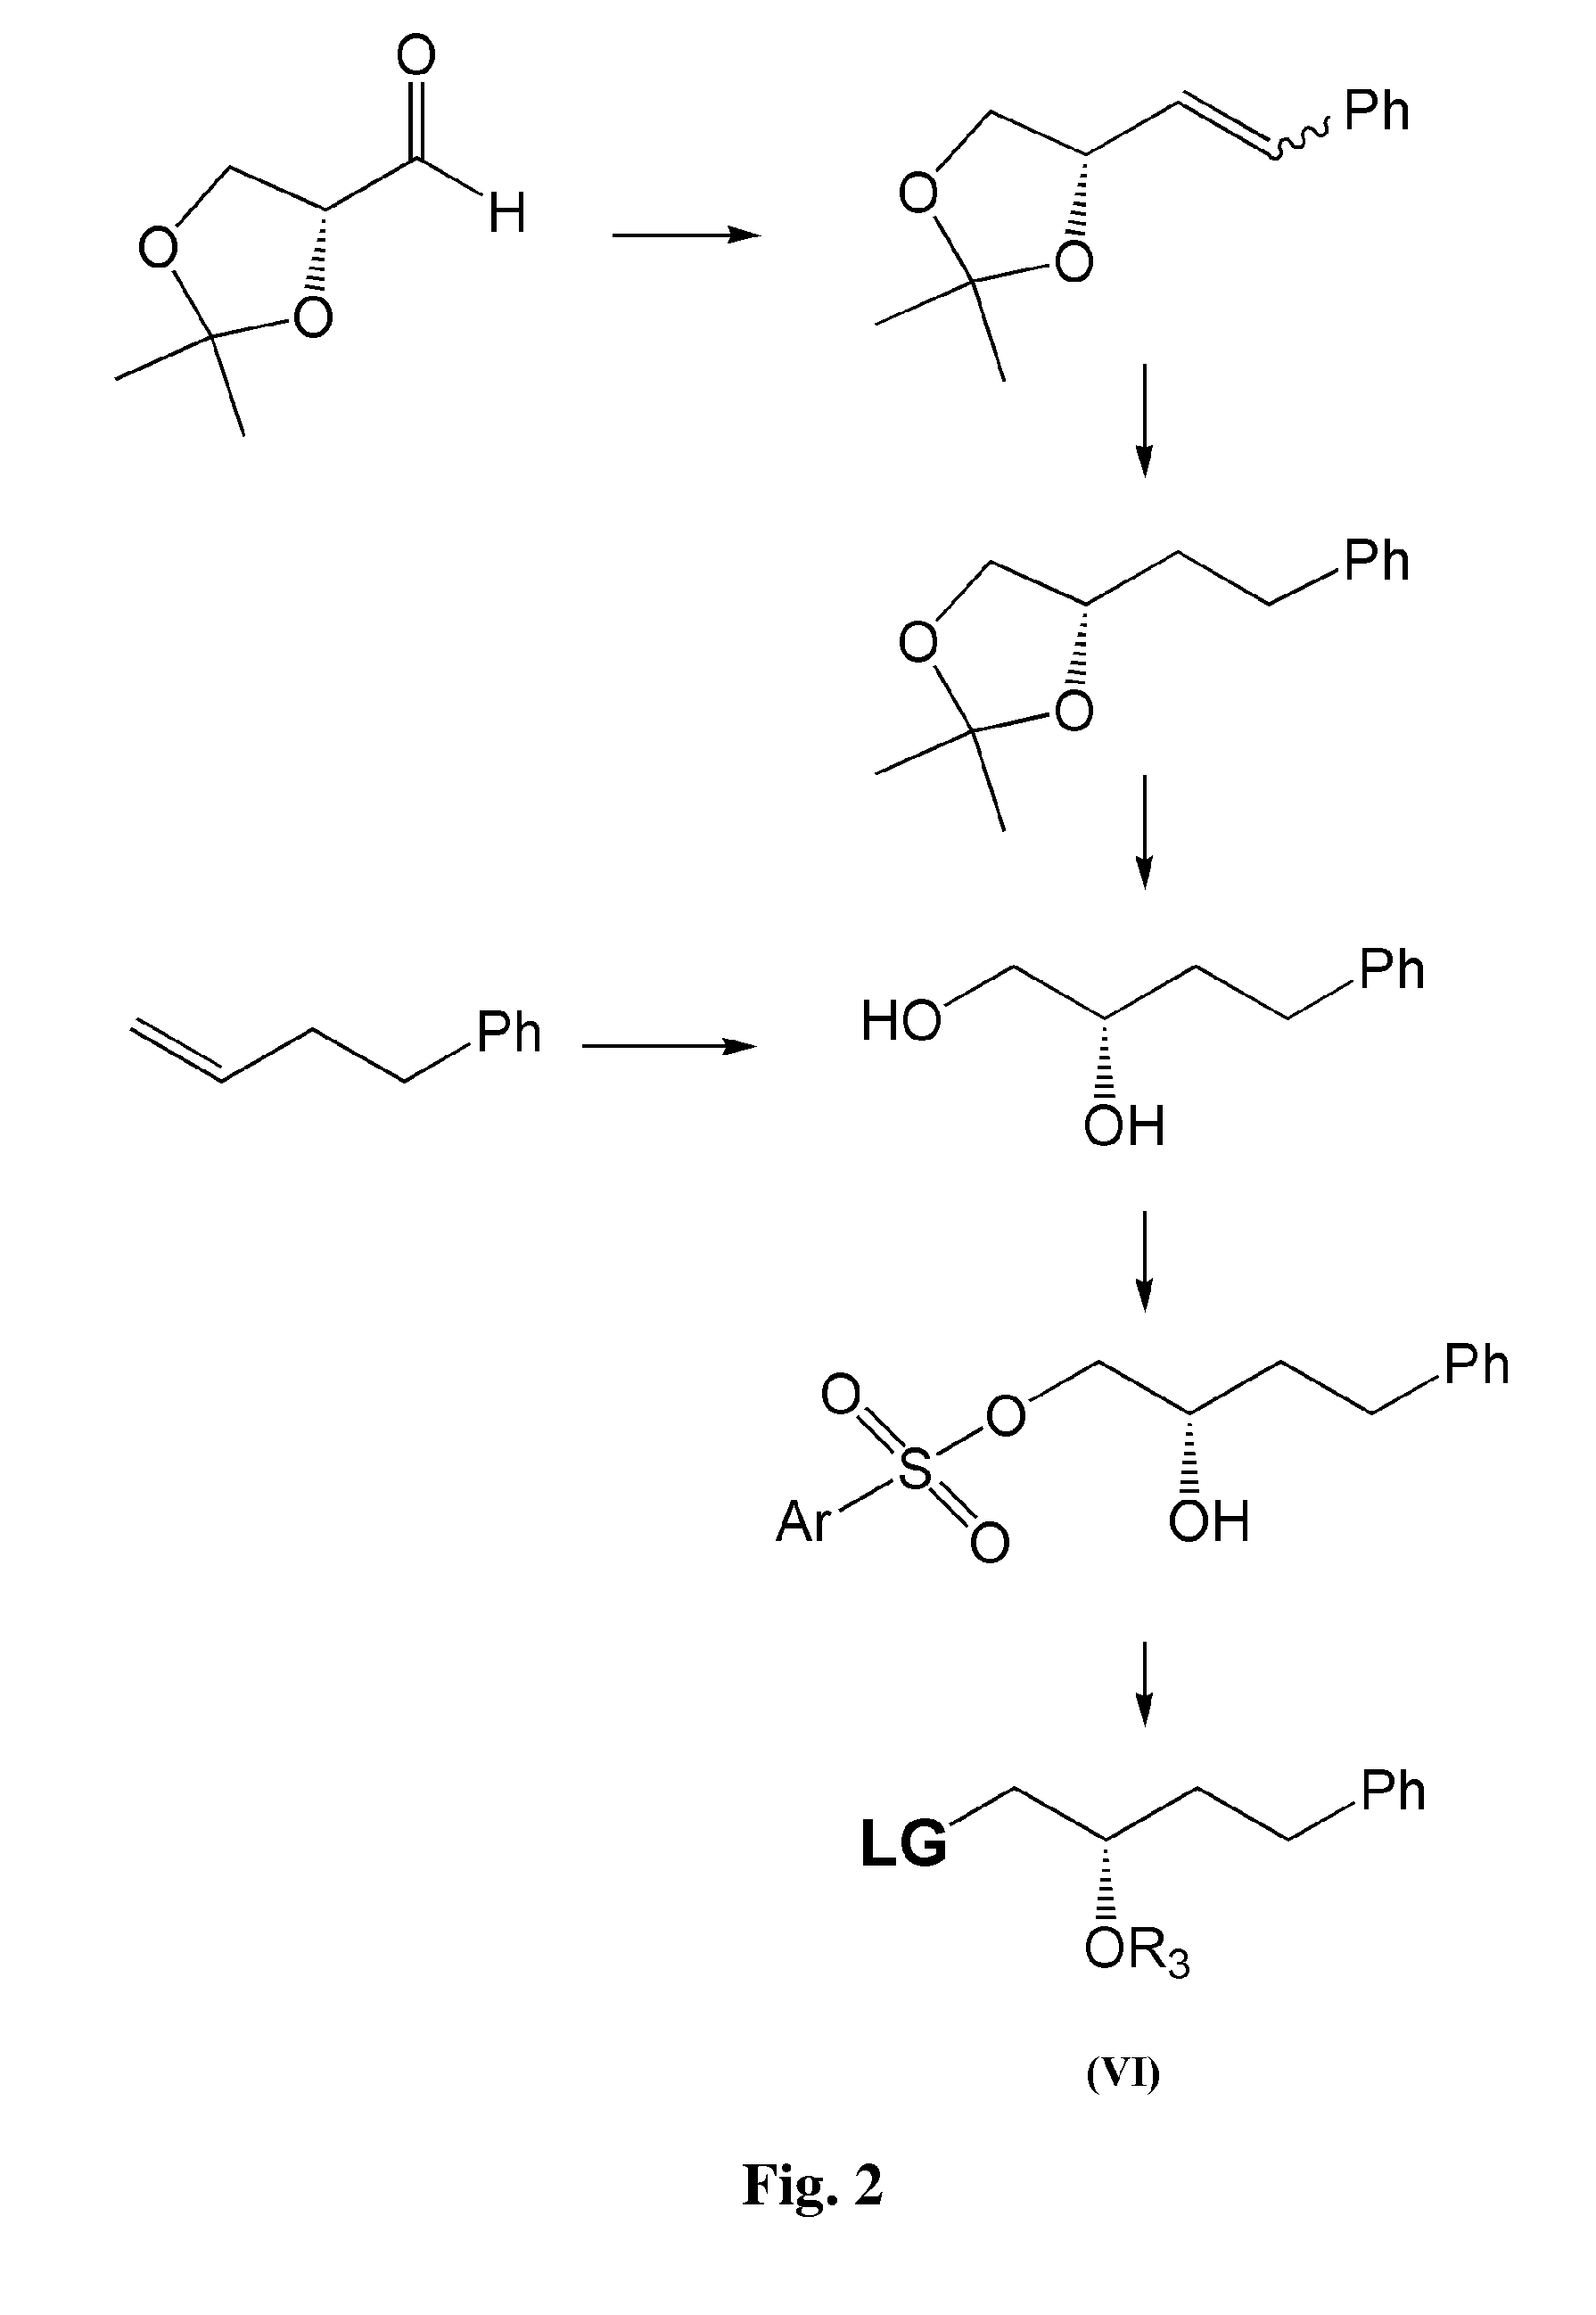 Process for preparation of 13,14-dihydro-pgf2 alpha derivatives